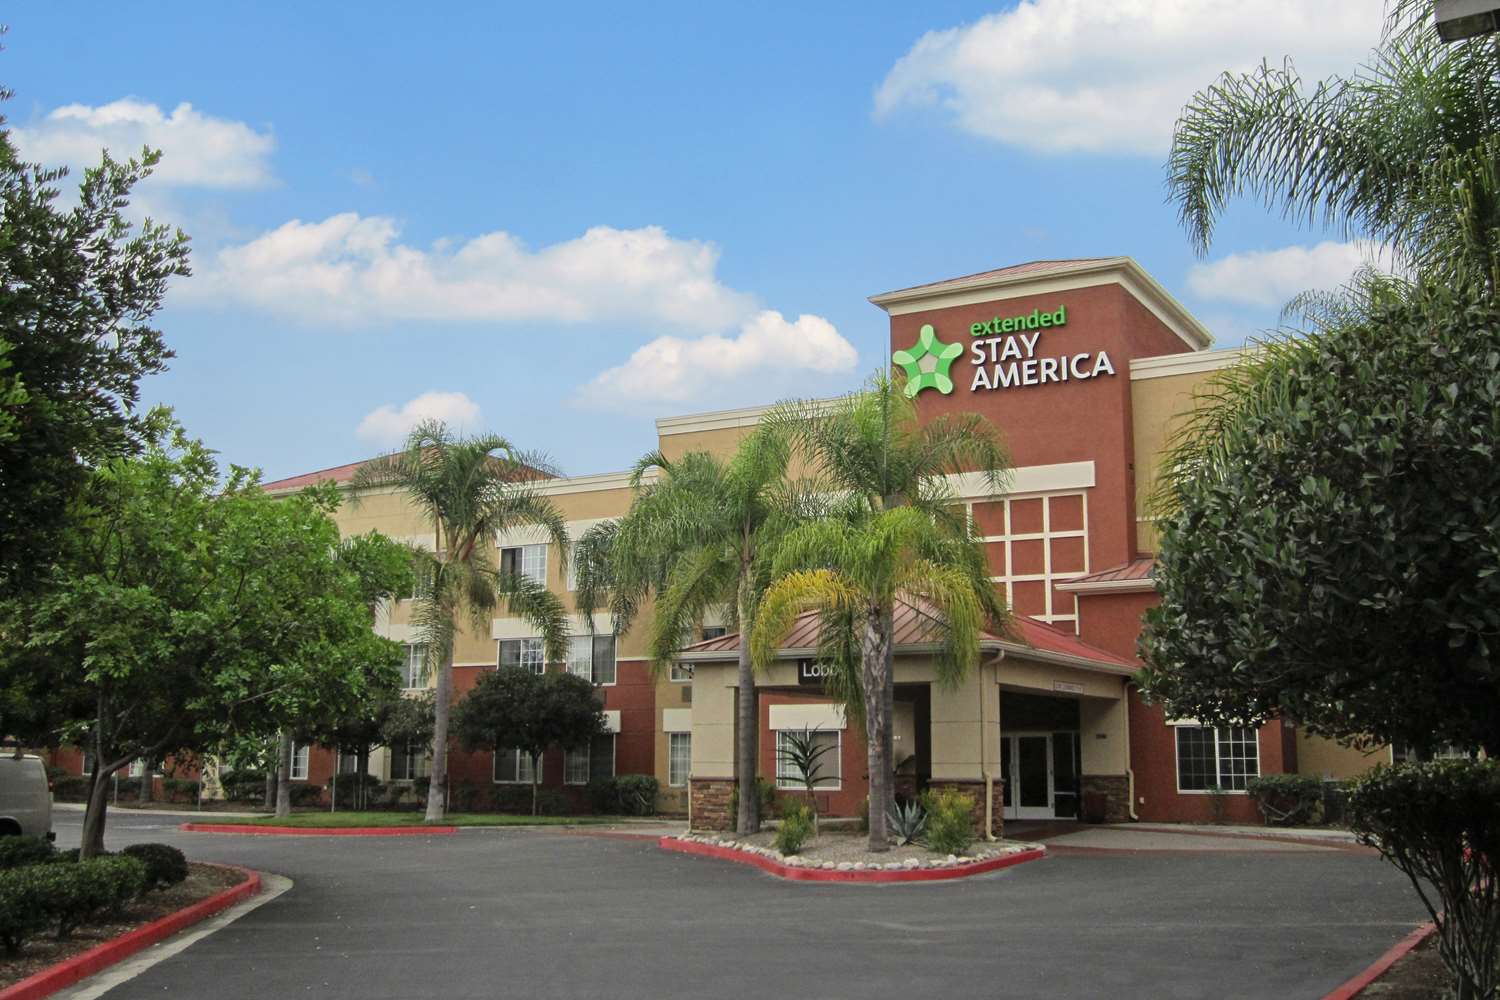 Pet Friendly Extended Stay America - Orange County - Cypress in Cypress, California